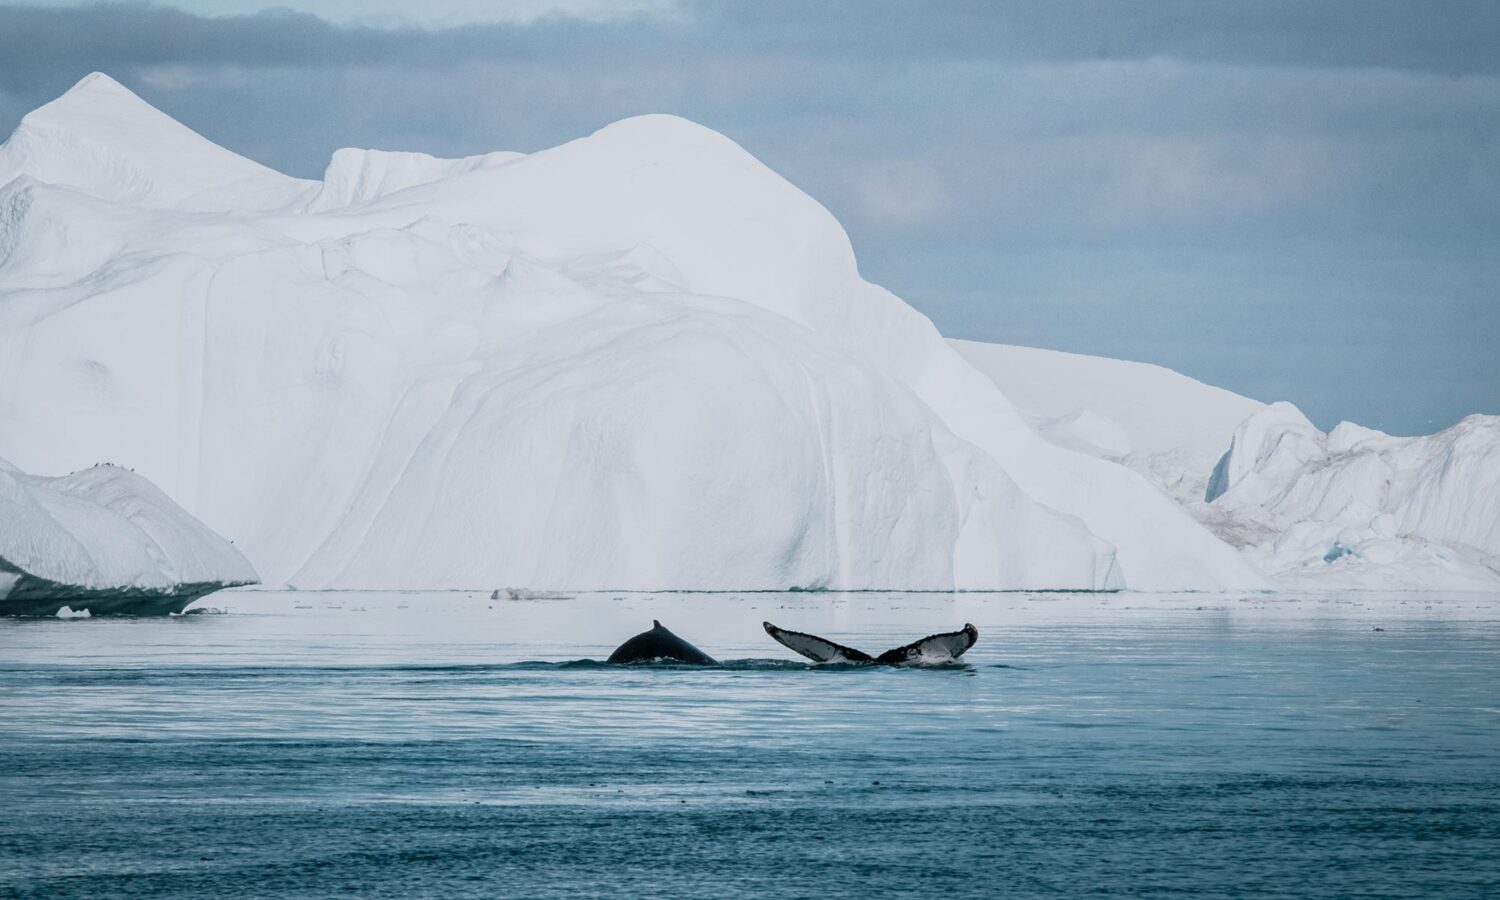 Arctic summer in Ilulissat – Explore the breathtaking scenery and discover the ideal time for whale watching in Greenland.